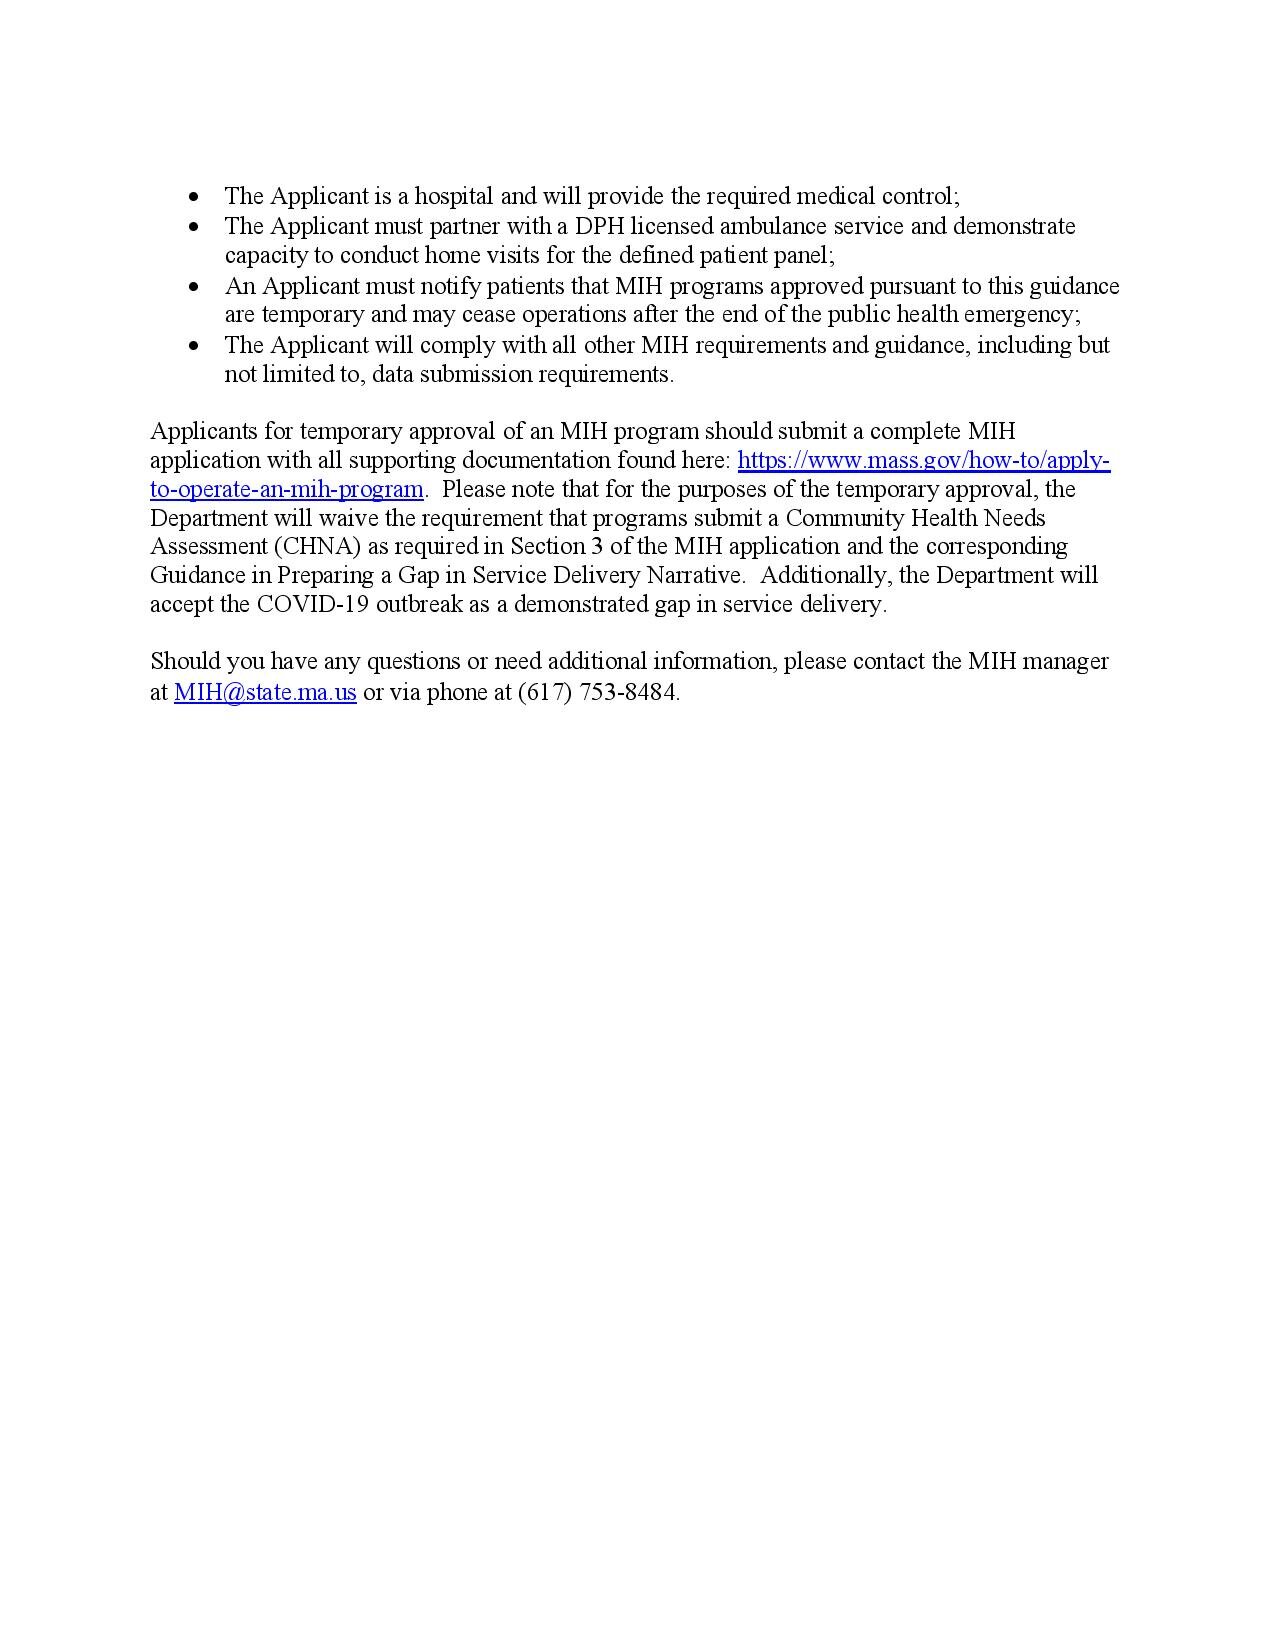 MIH Temporary License Guidance-page-002.jpg